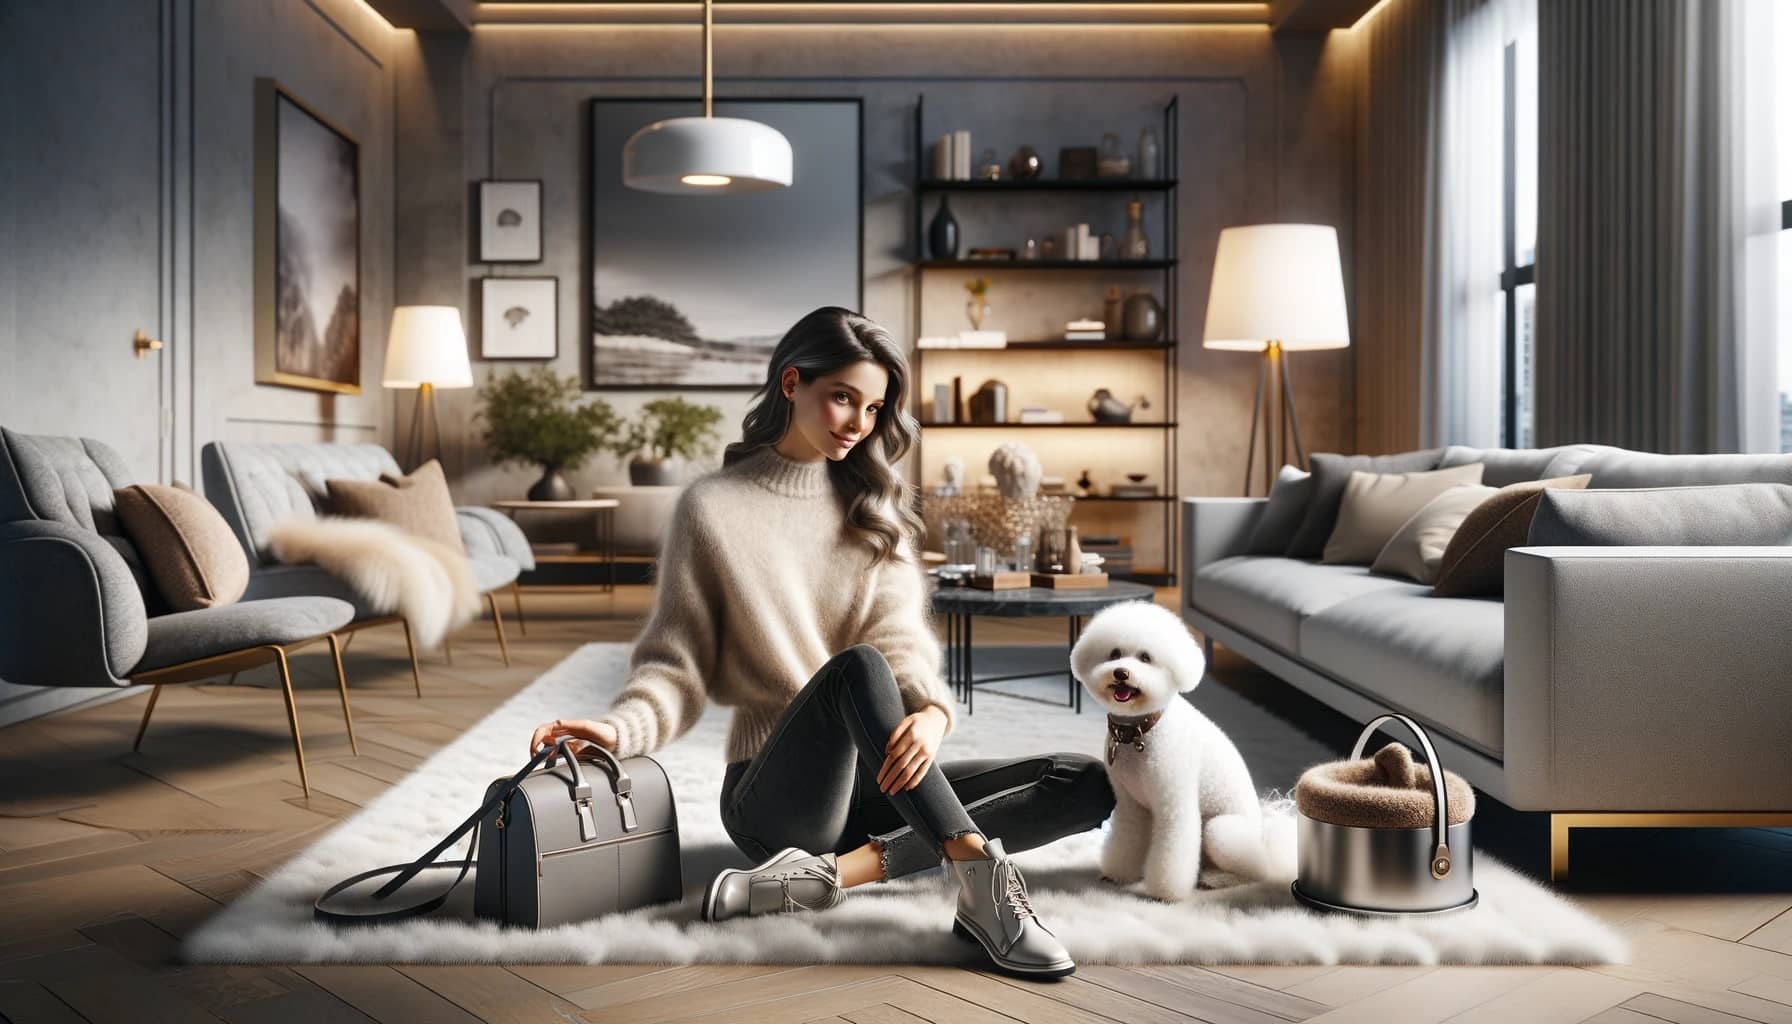 modern living room where a stylish young woman interacts affectionately with her fluffy white Bichon Frise dog